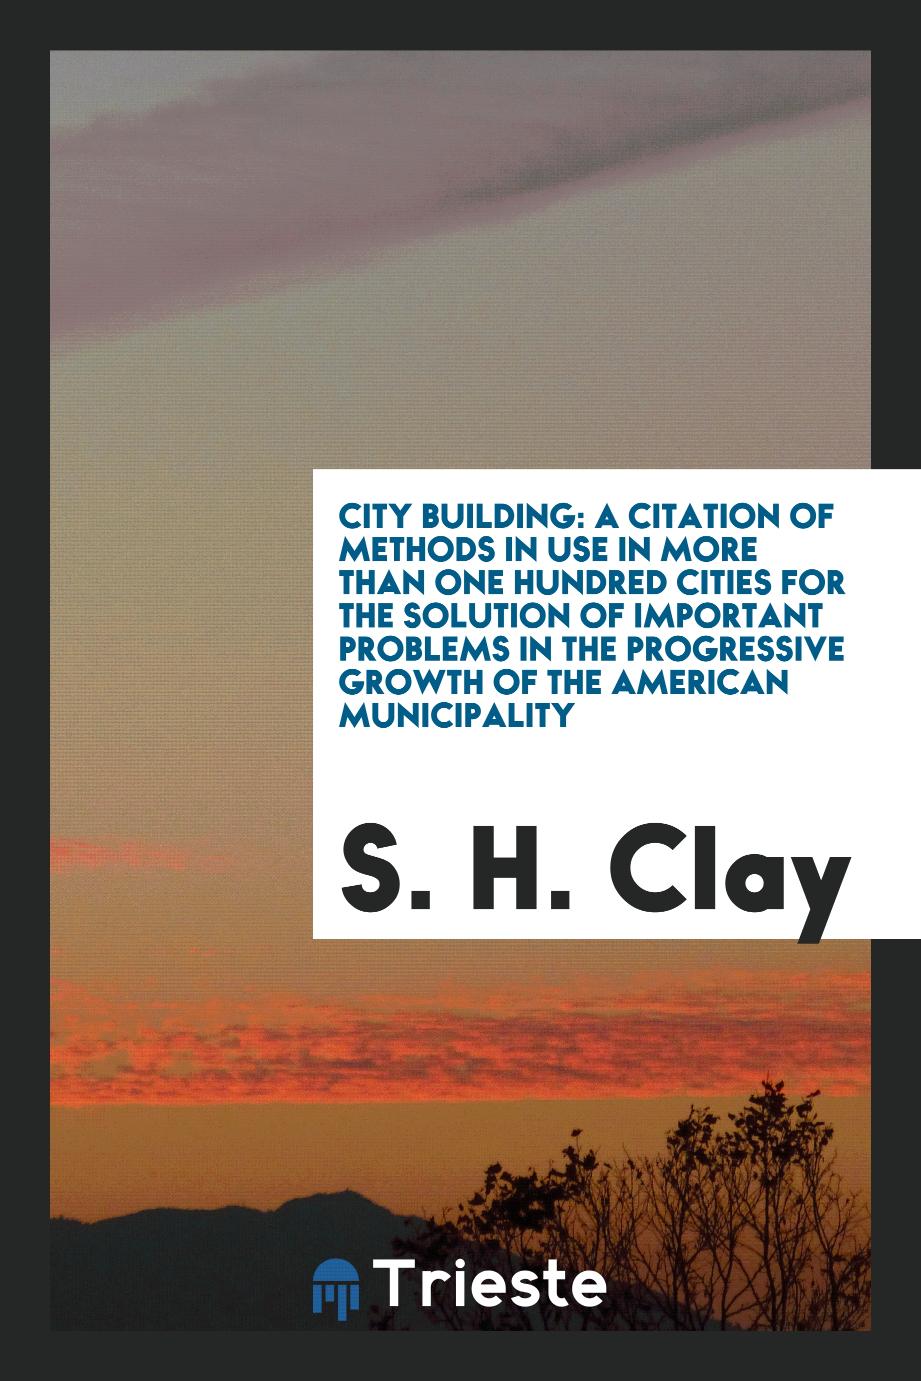 City Building: A Citation of Methods in Use in More than One Hundred Cities for the Solution of Important Problems in the Progressive Growth of the American Municipality